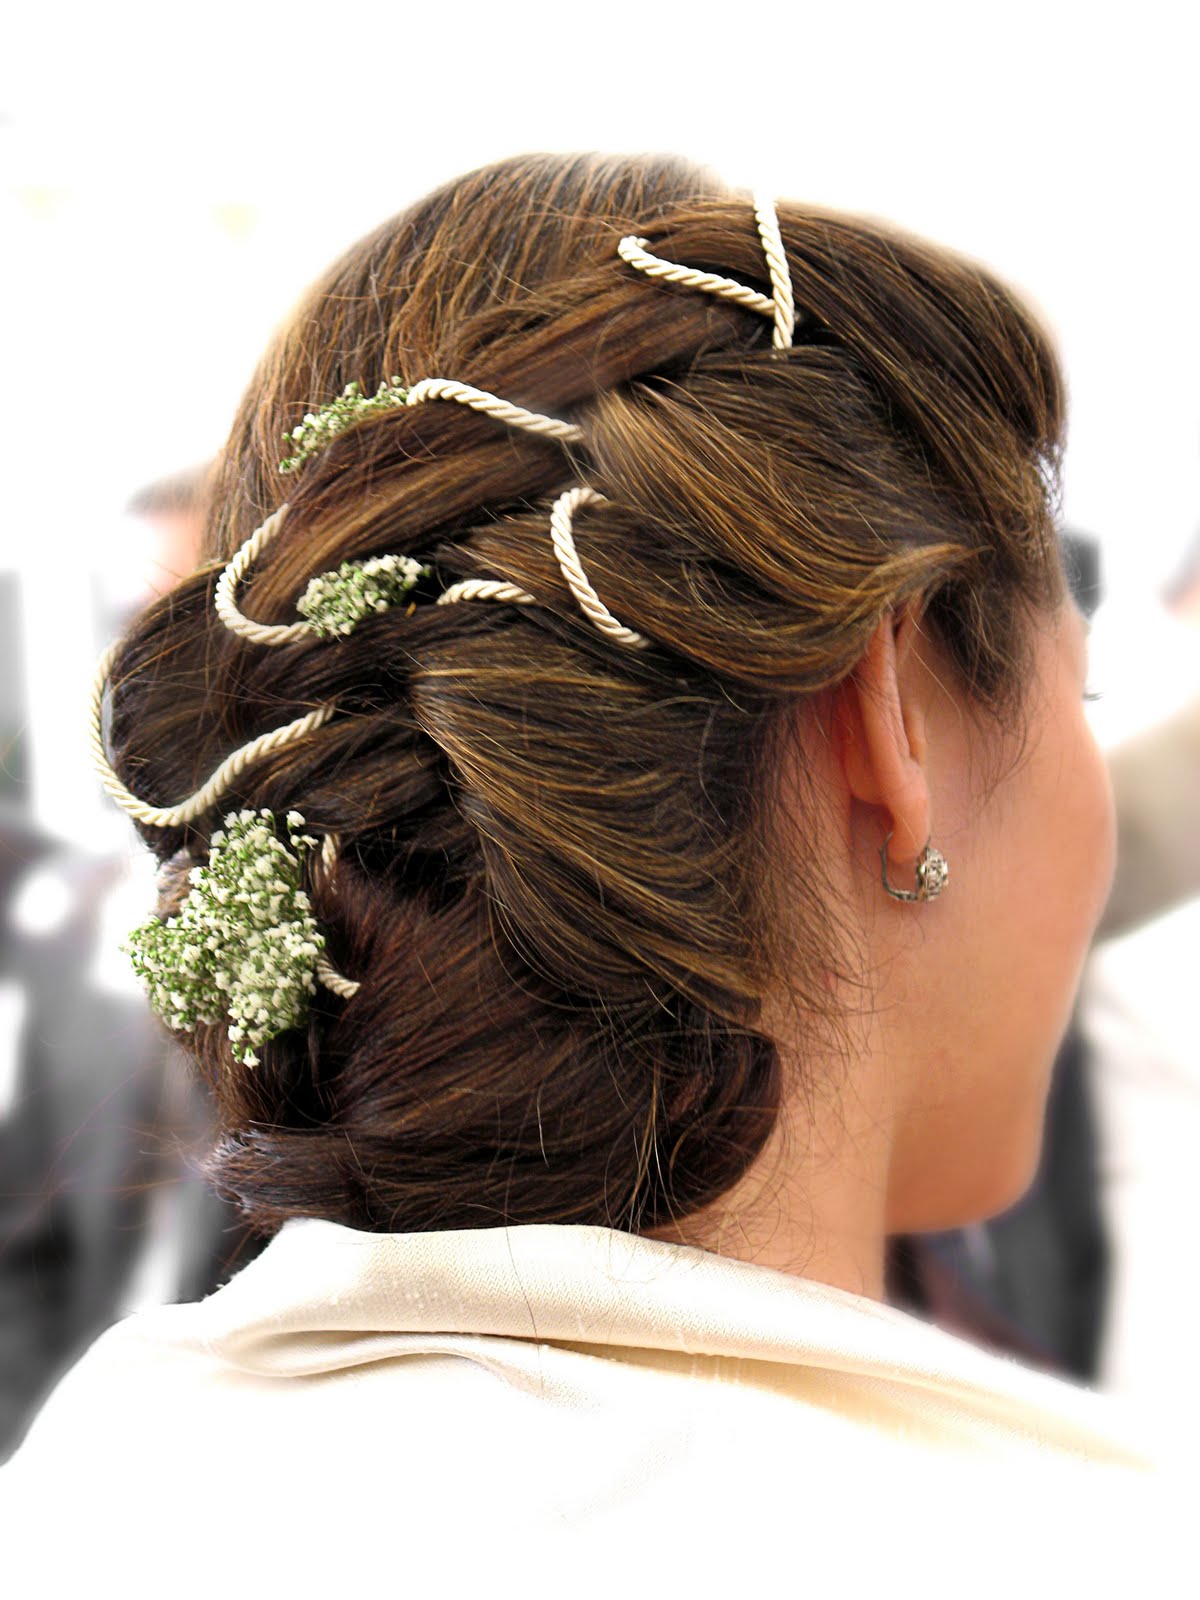 Summer and Spring Hair Styling Tips for a Gorgeous Wedding Hairstyle